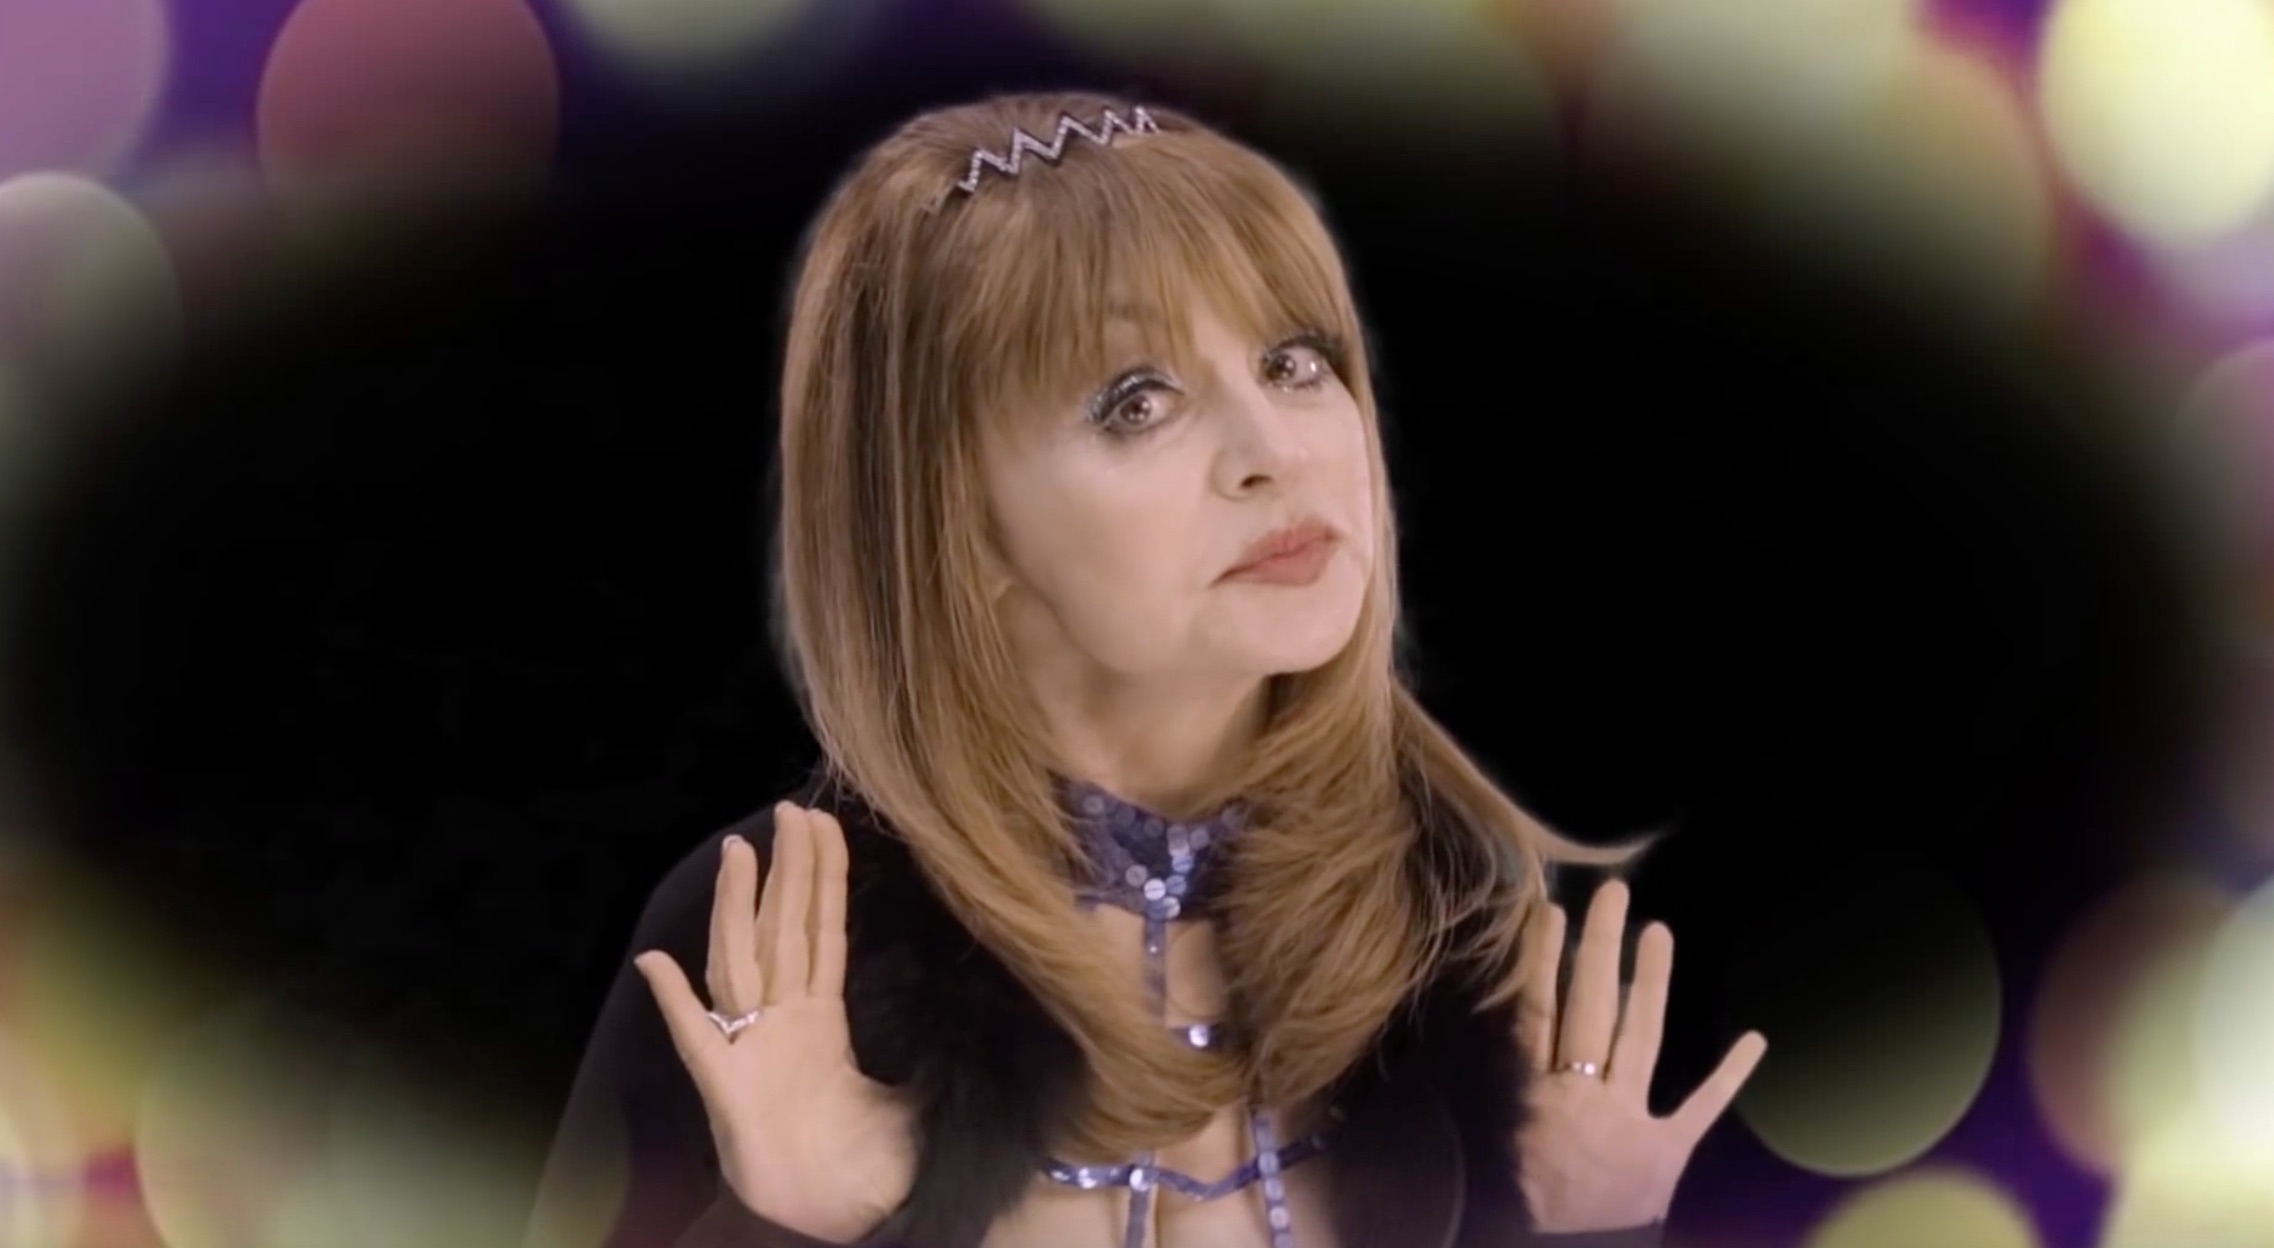 Comedian Judy Tenuta singing about her Christmas Wish - music video Produced by Pirromount Pictures